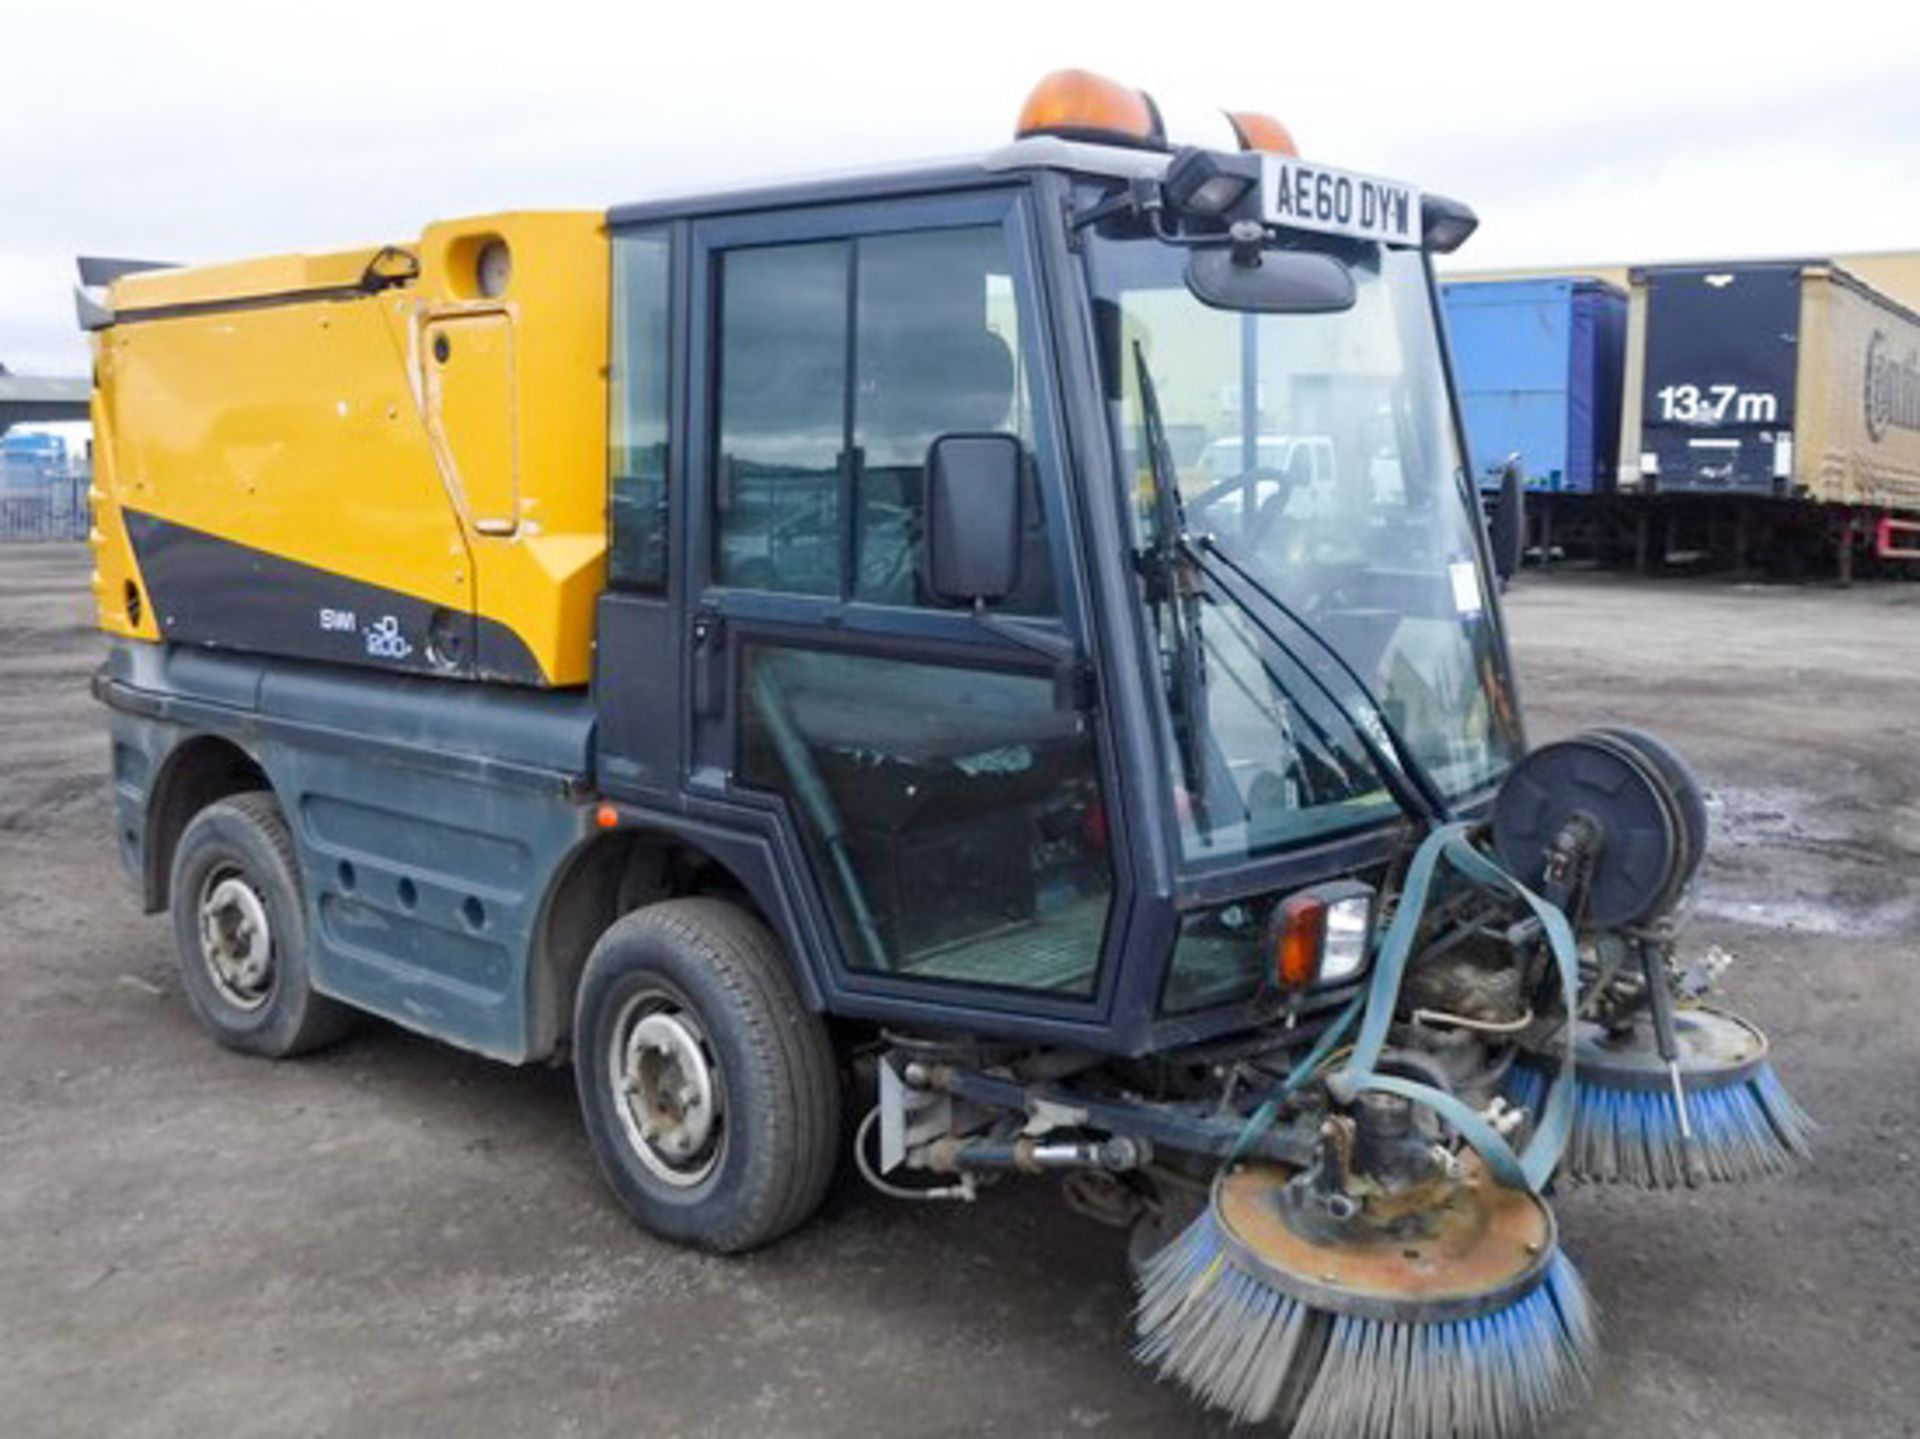 2011 SCHMIDT PRECNCT SWEEPER, REG AE60 DYW, 2 AXLES. DOCUMENTS IN OFFICE. - Image 3 of 15